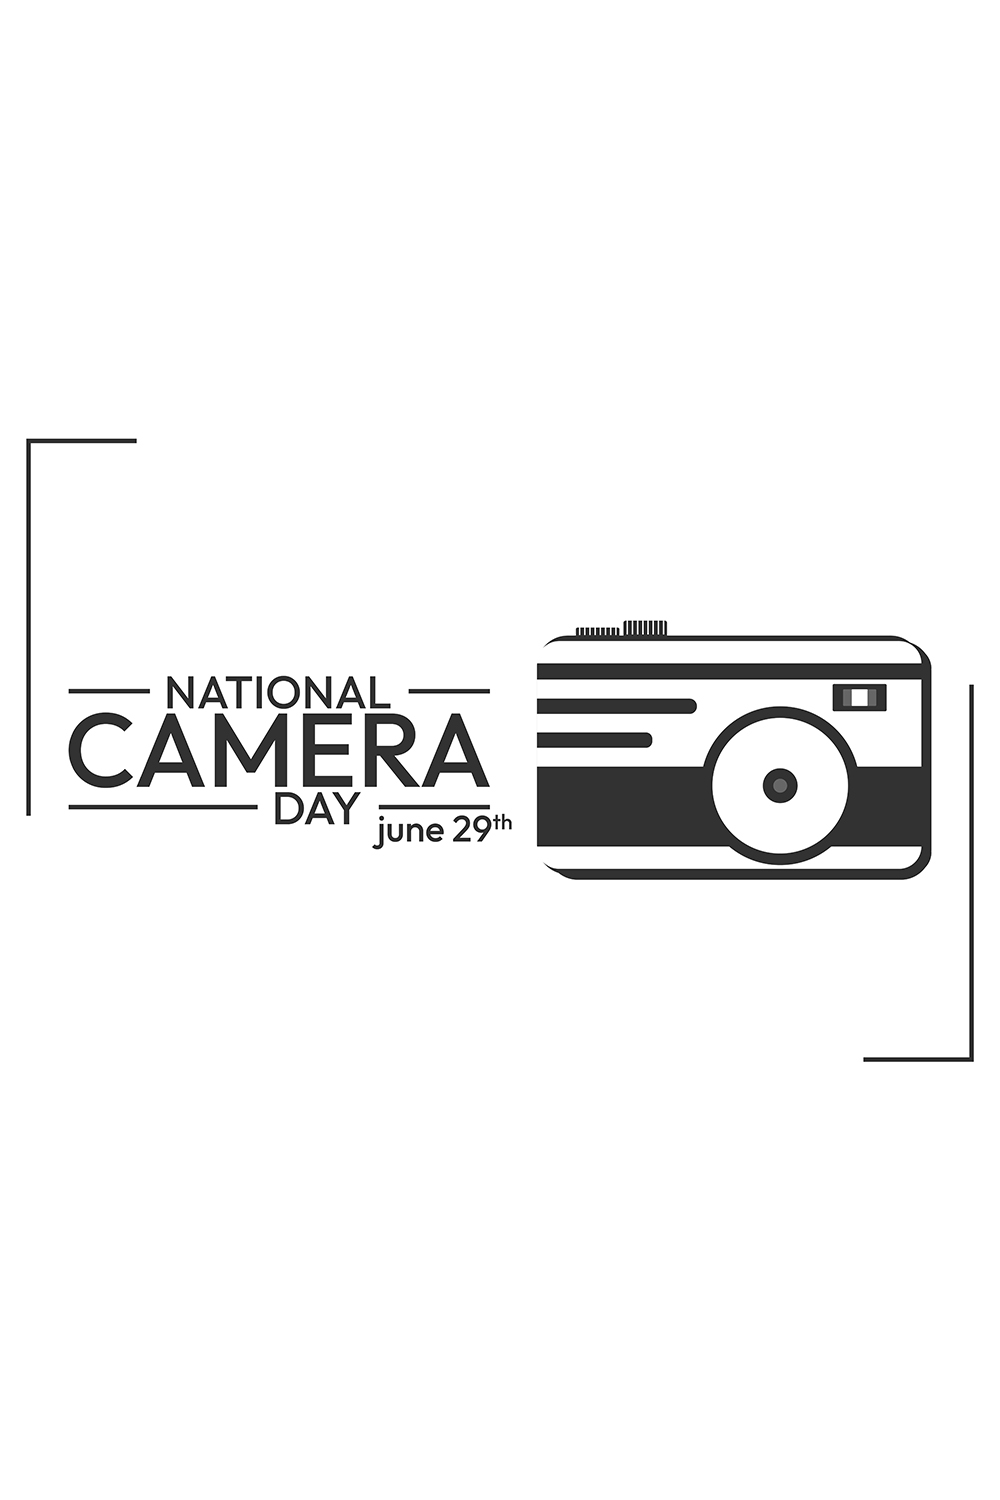 National Camera Day pinterest preview image.